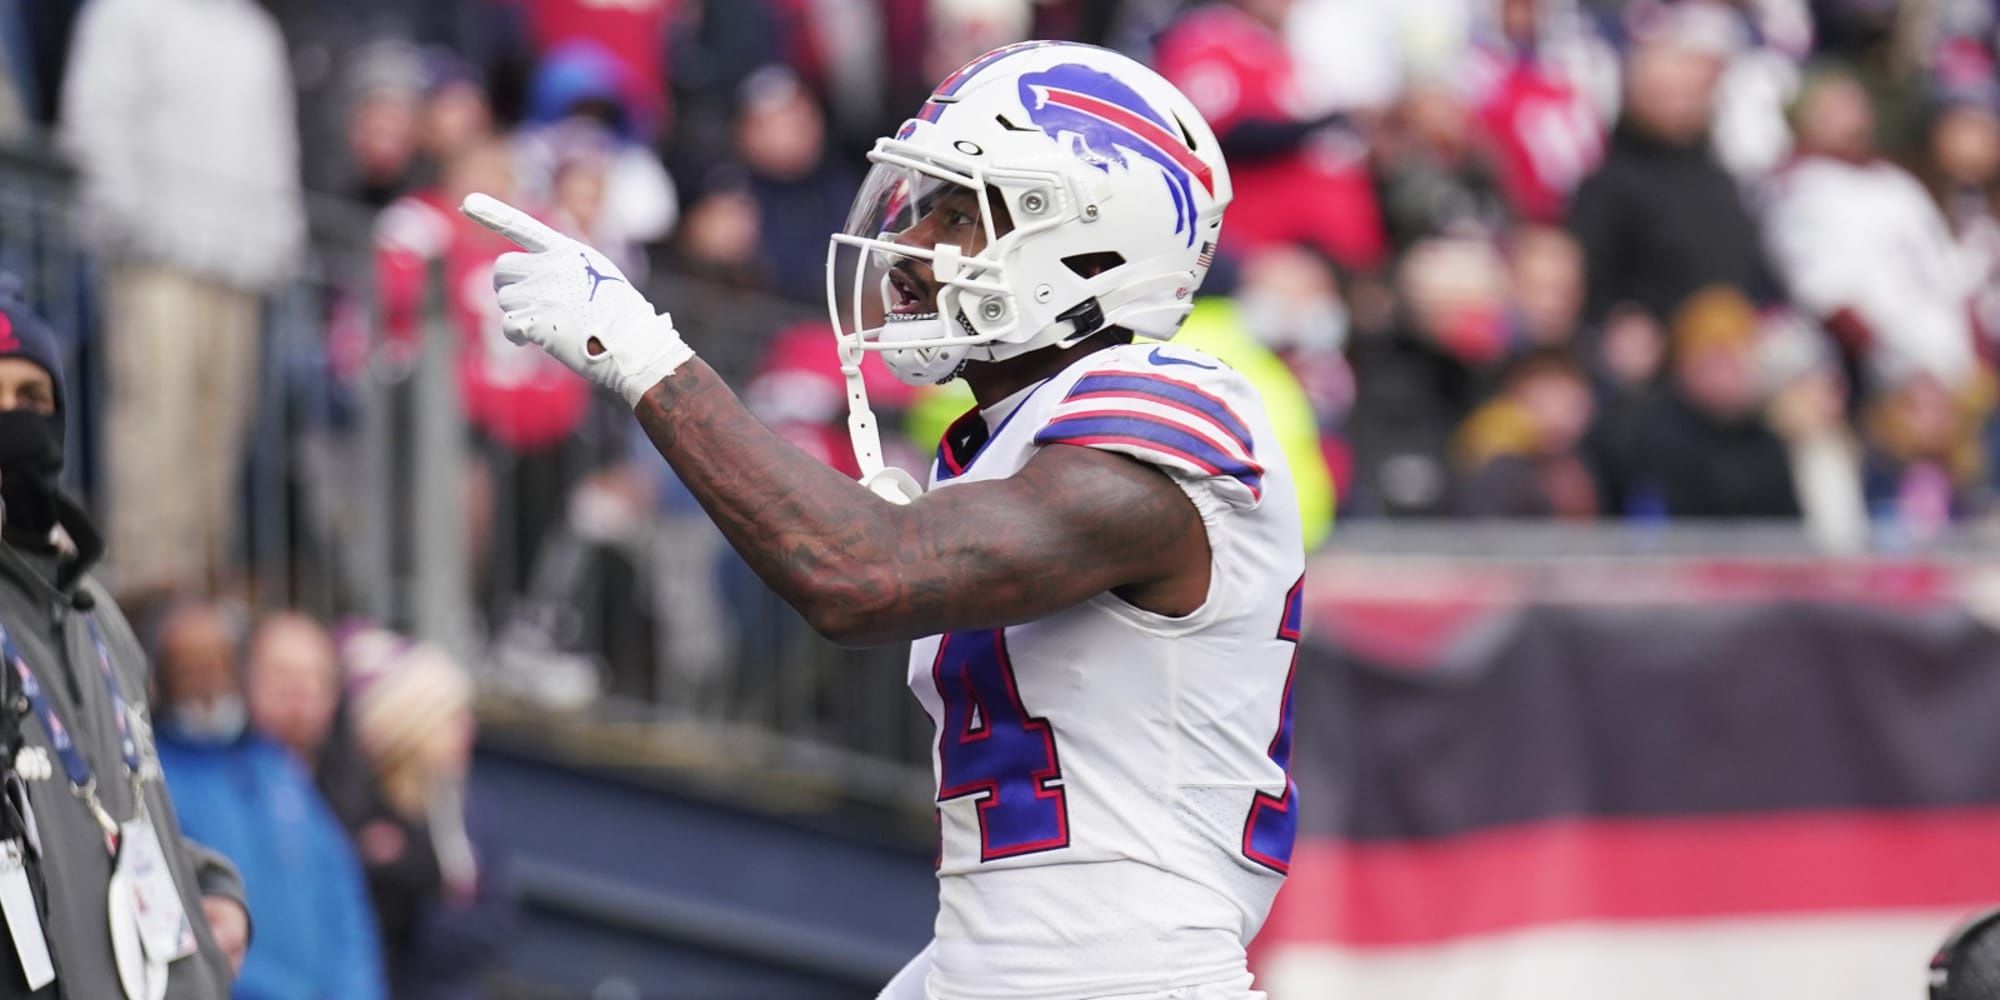 Stefon Diggs celebrating a catch in a white Bills jersey